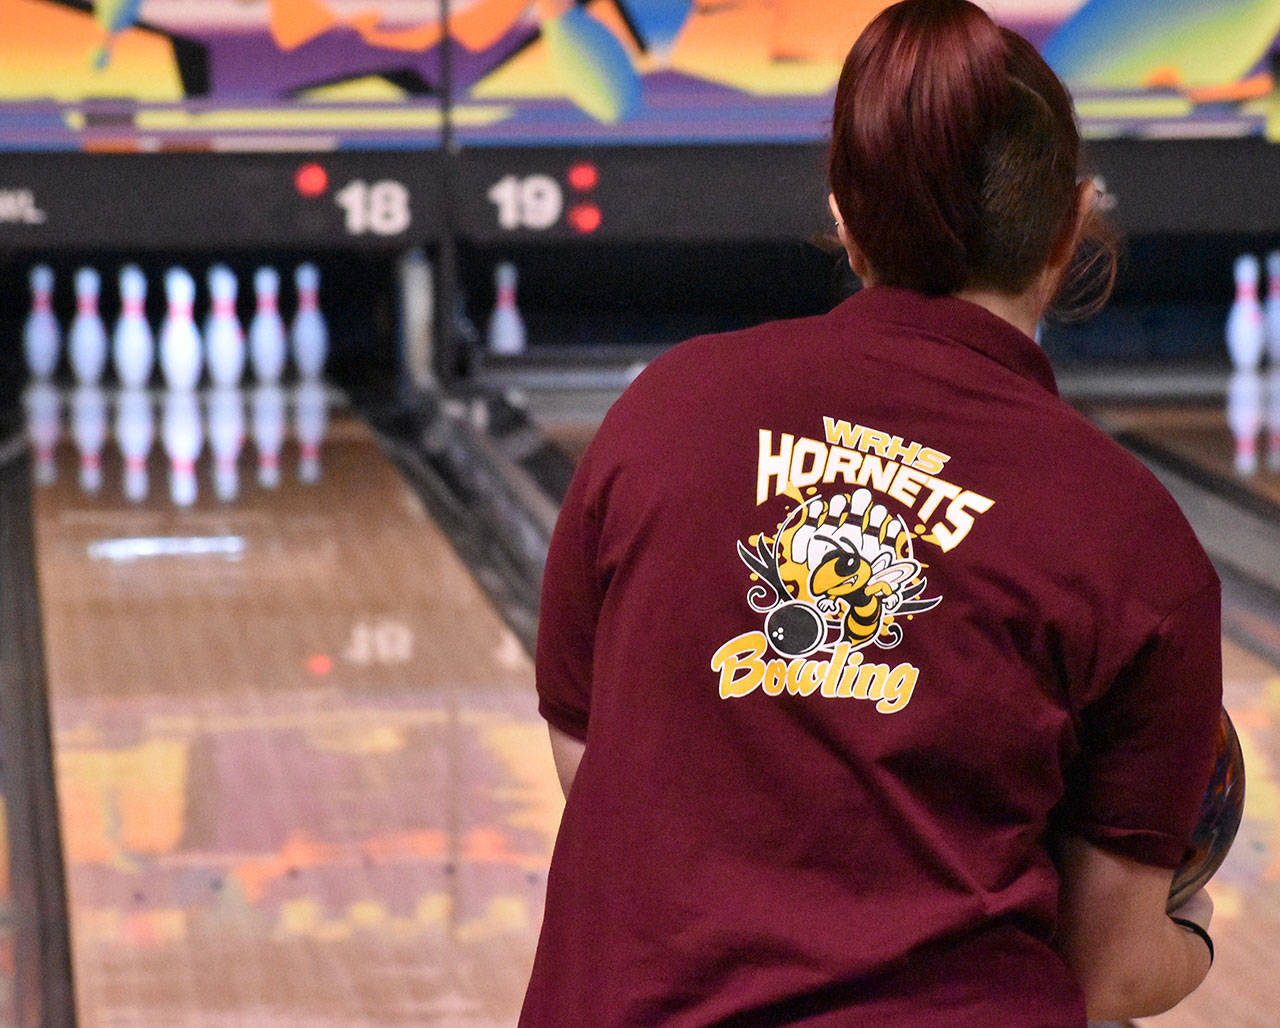 Jojo LaTurner, White River’s top bowler, competes during last week’s action at Daffodil Bowl in Puyallup. Photo by Kevin Hanson